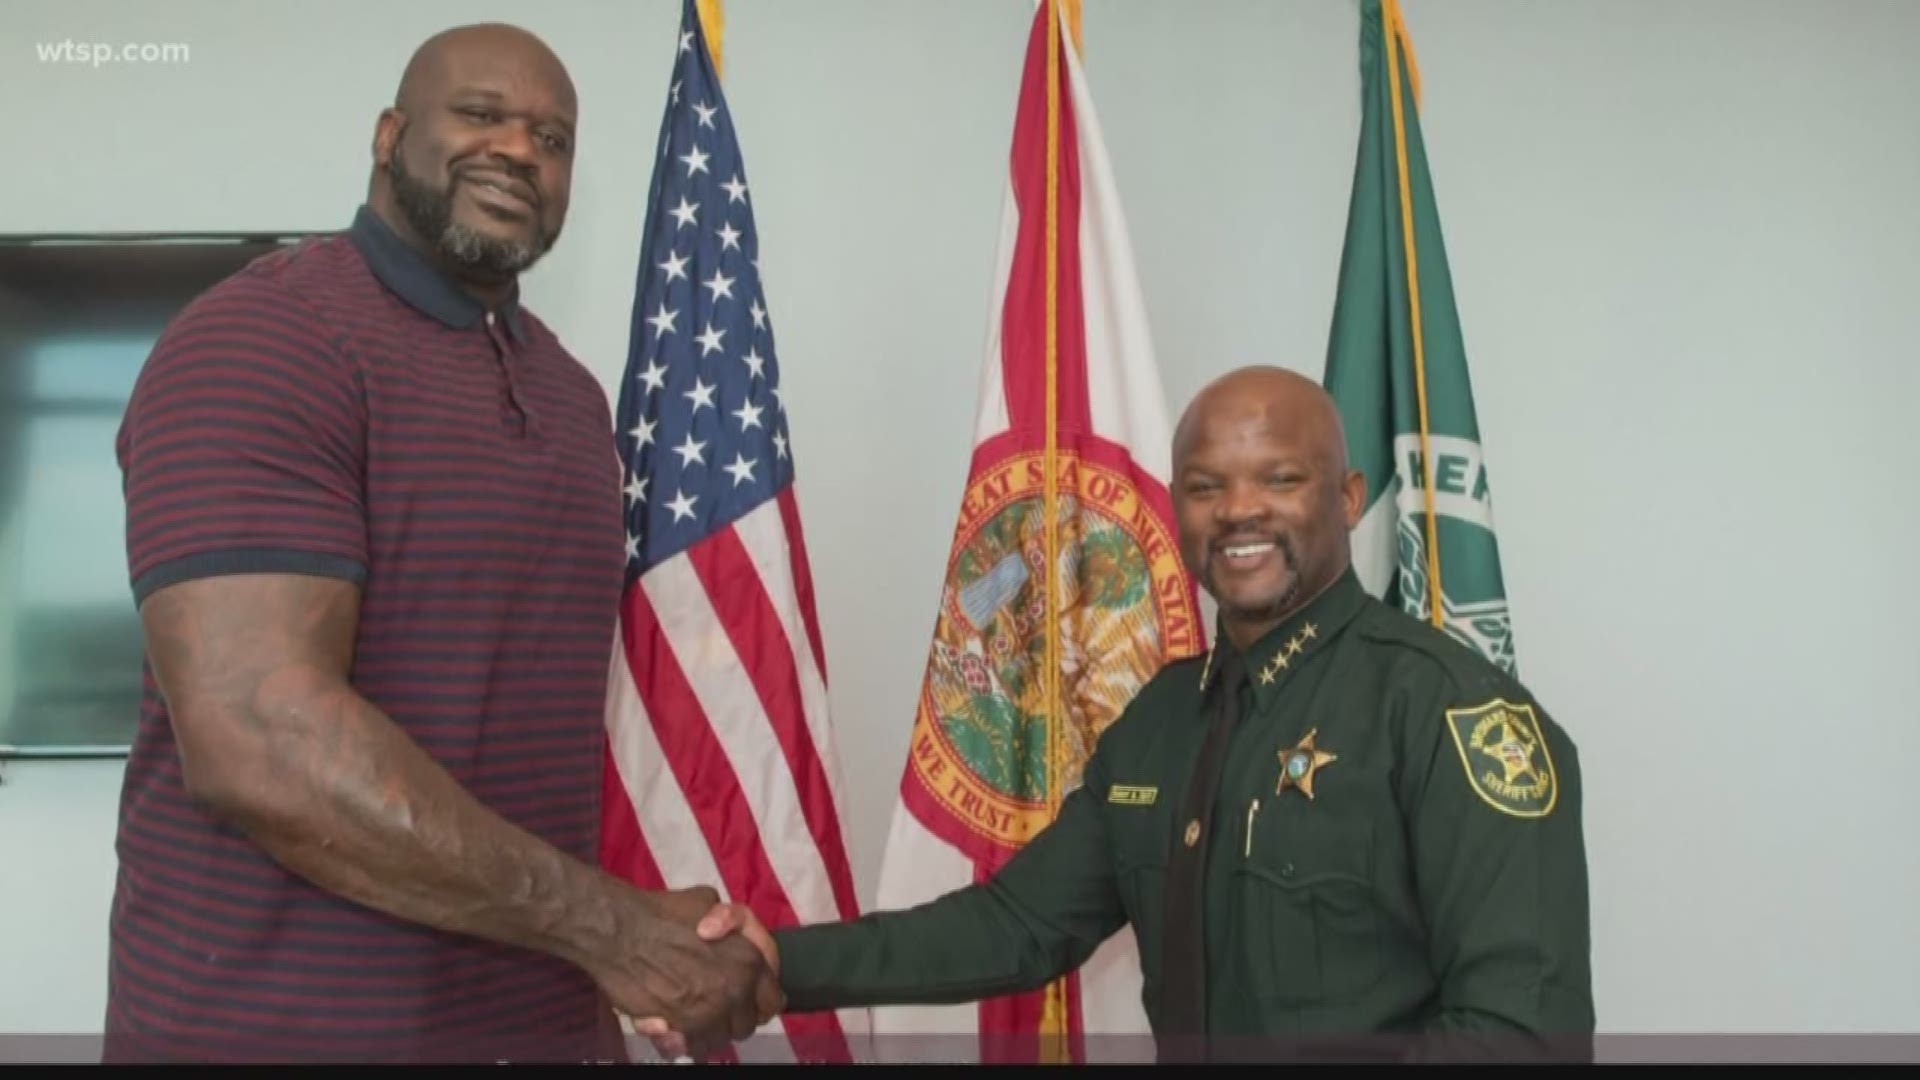 The Broward County Sheriff's Office has a new, very tall member on its team.